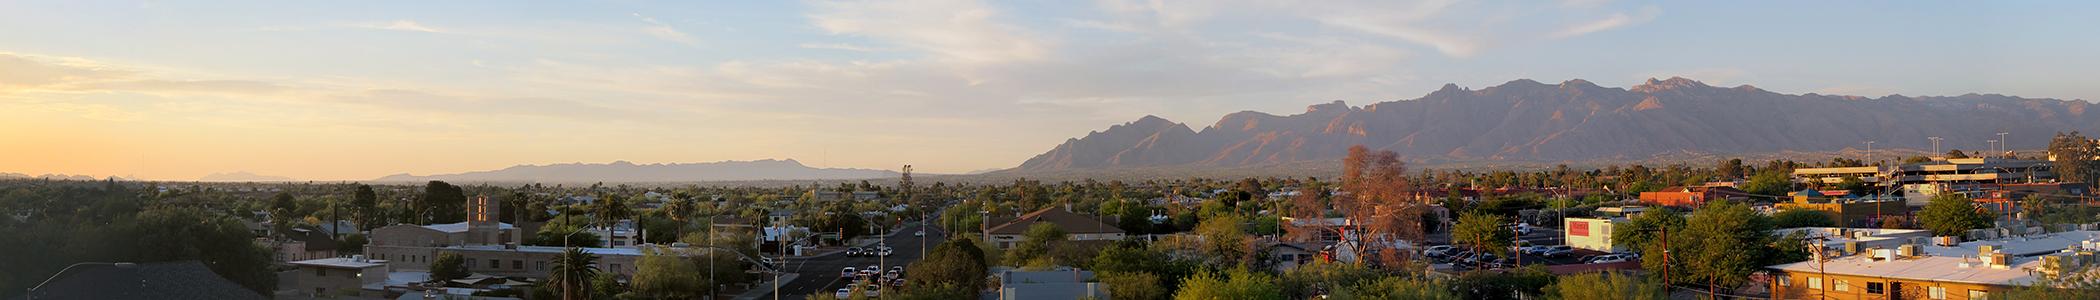 Banner image for Tucson on GigsGuide